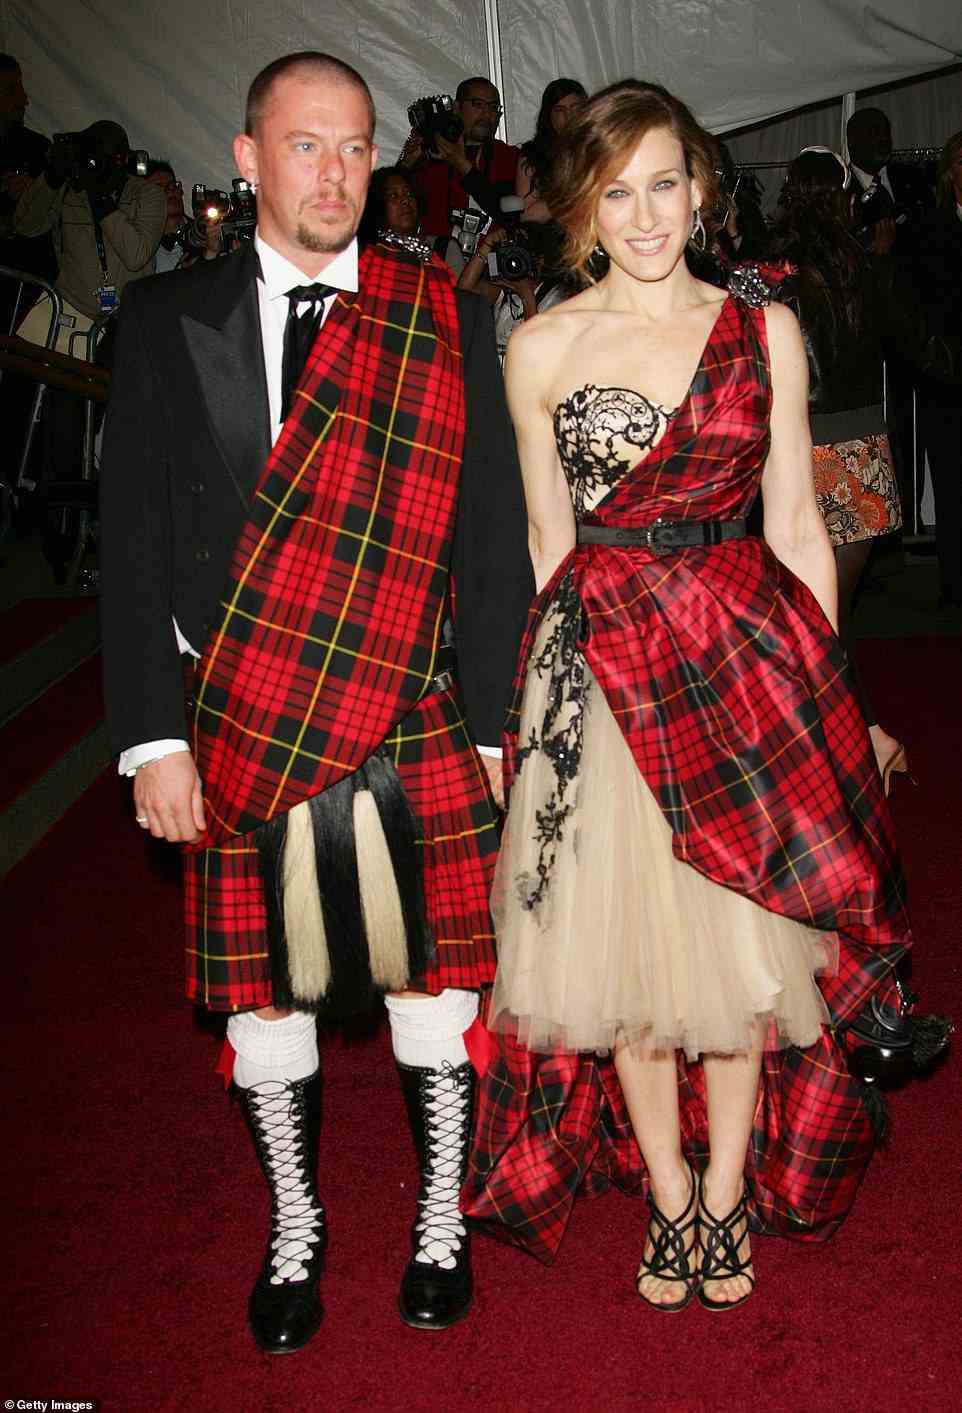 Sarah Jessica Parker came as Alexander McQueen's quset to 'Anglomania: Tradition and Transgression in British Fashion in 2016, with both donning red tartan